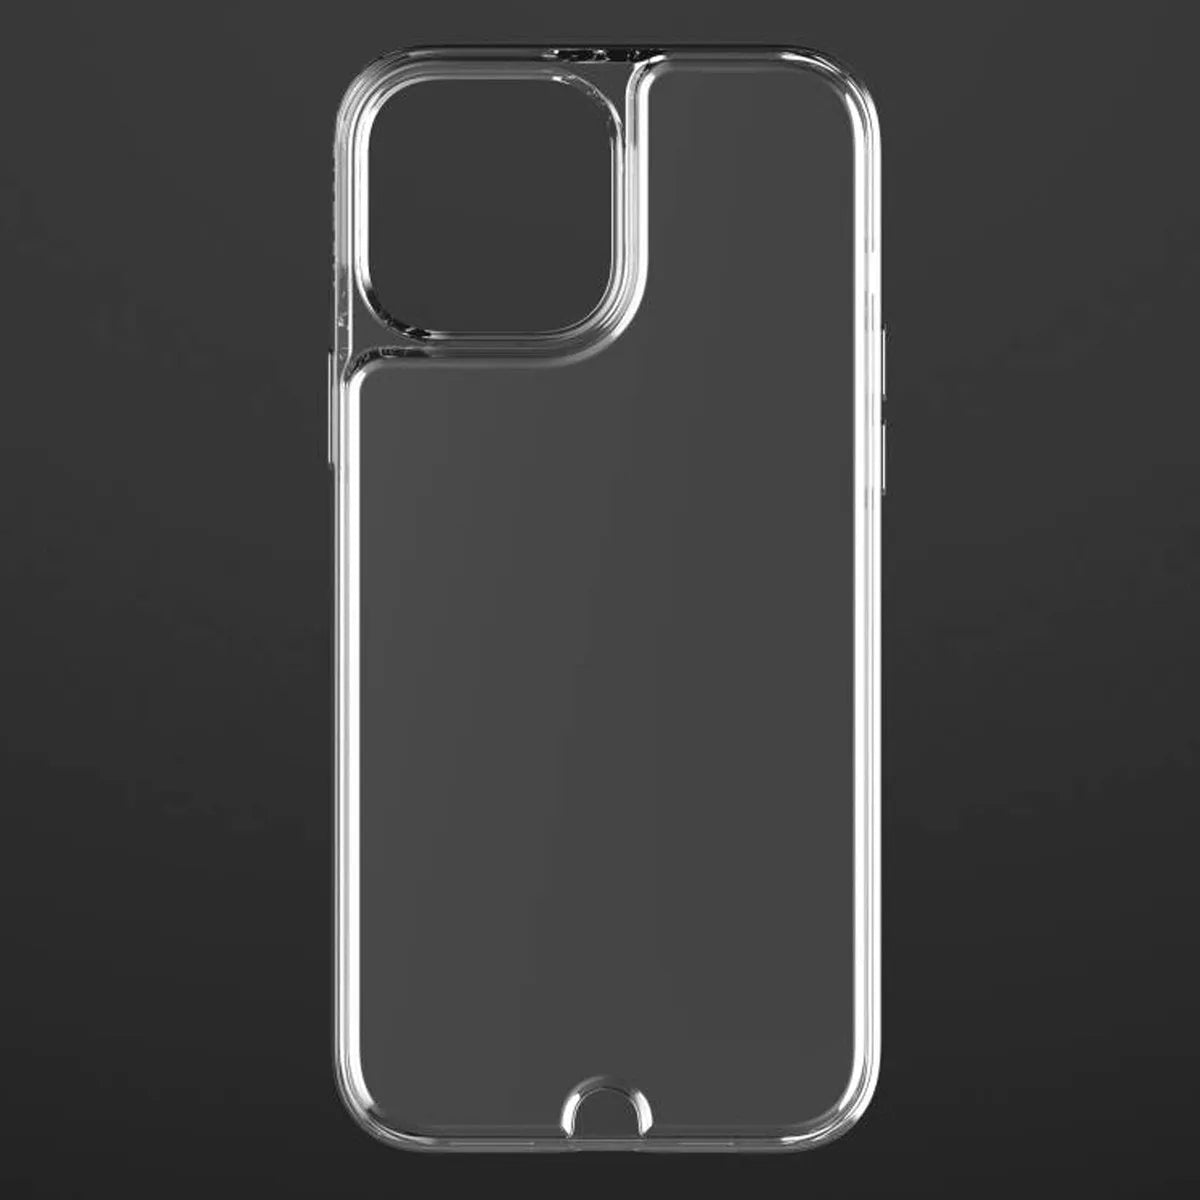 Fortress Fortress Infinite Glass Case for iPhone 13 Pro  Scooch Infinite Glass